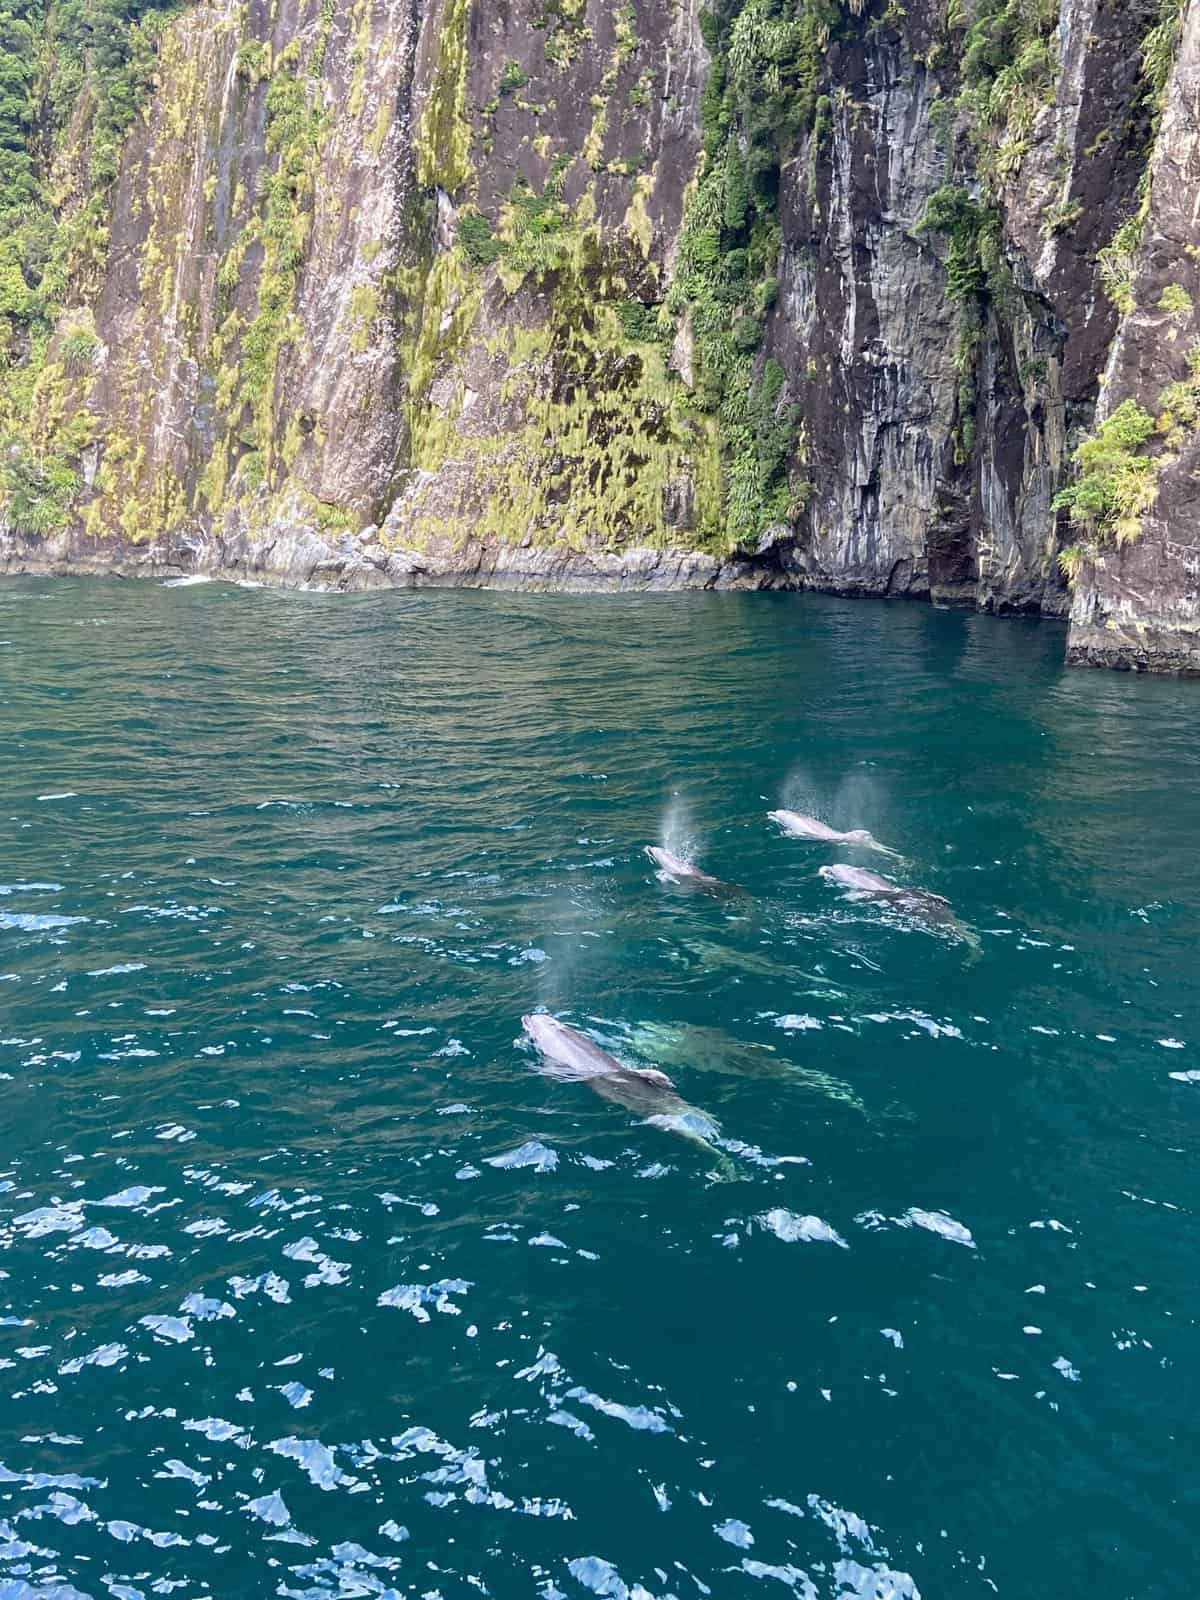 spotting dolphins in the water at Milford Sound on our cruise